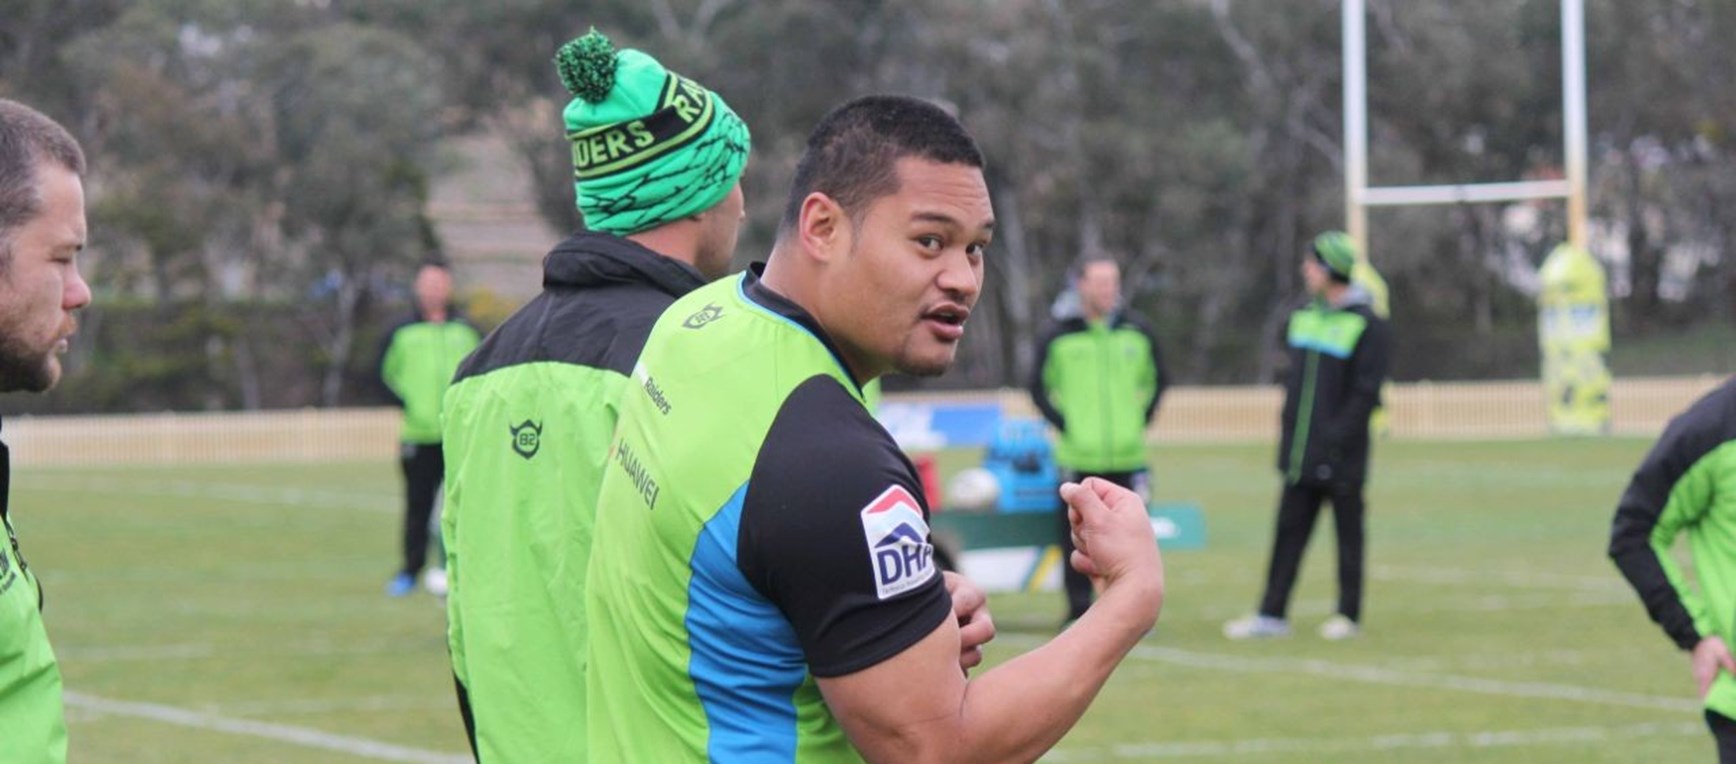 Gallery: Preparing for Manly